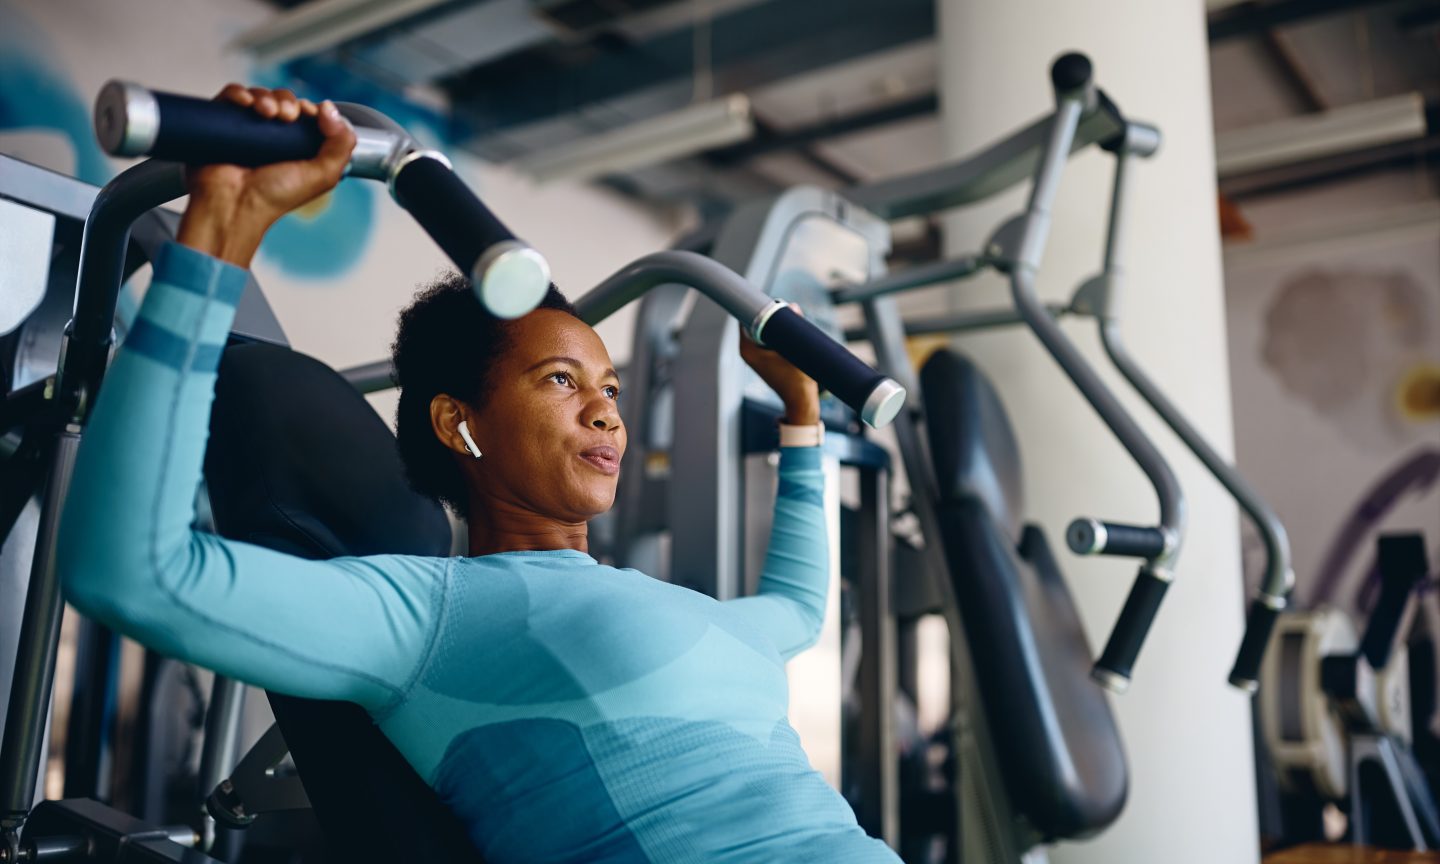 How A lot Does a 24 Hour Health Membership Value? – NerdWallet